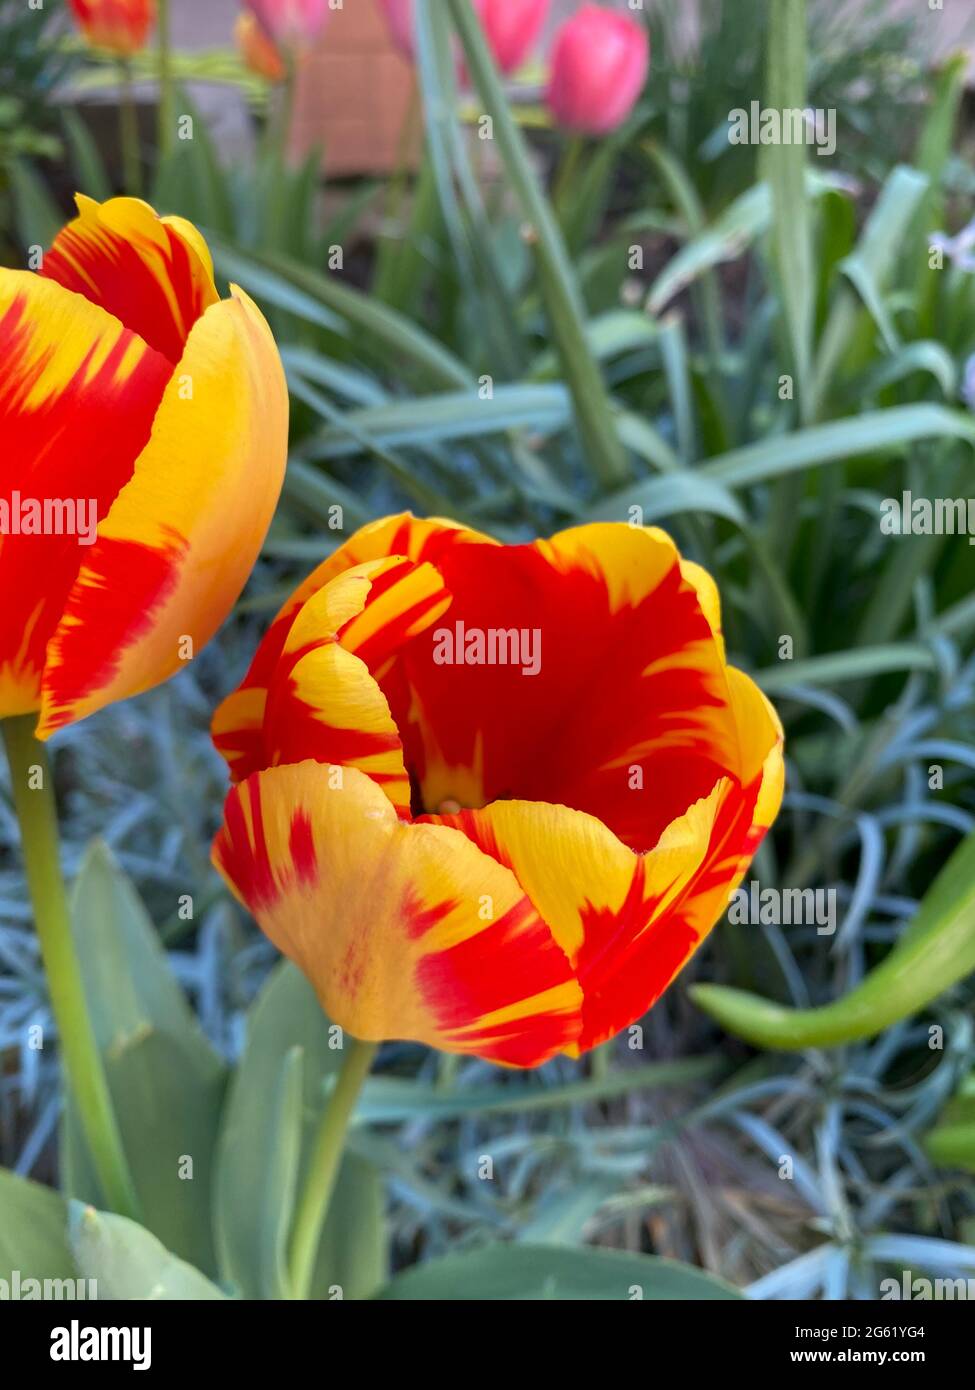 Red with yellow tulip in bloom close-up view of it Stock Photo